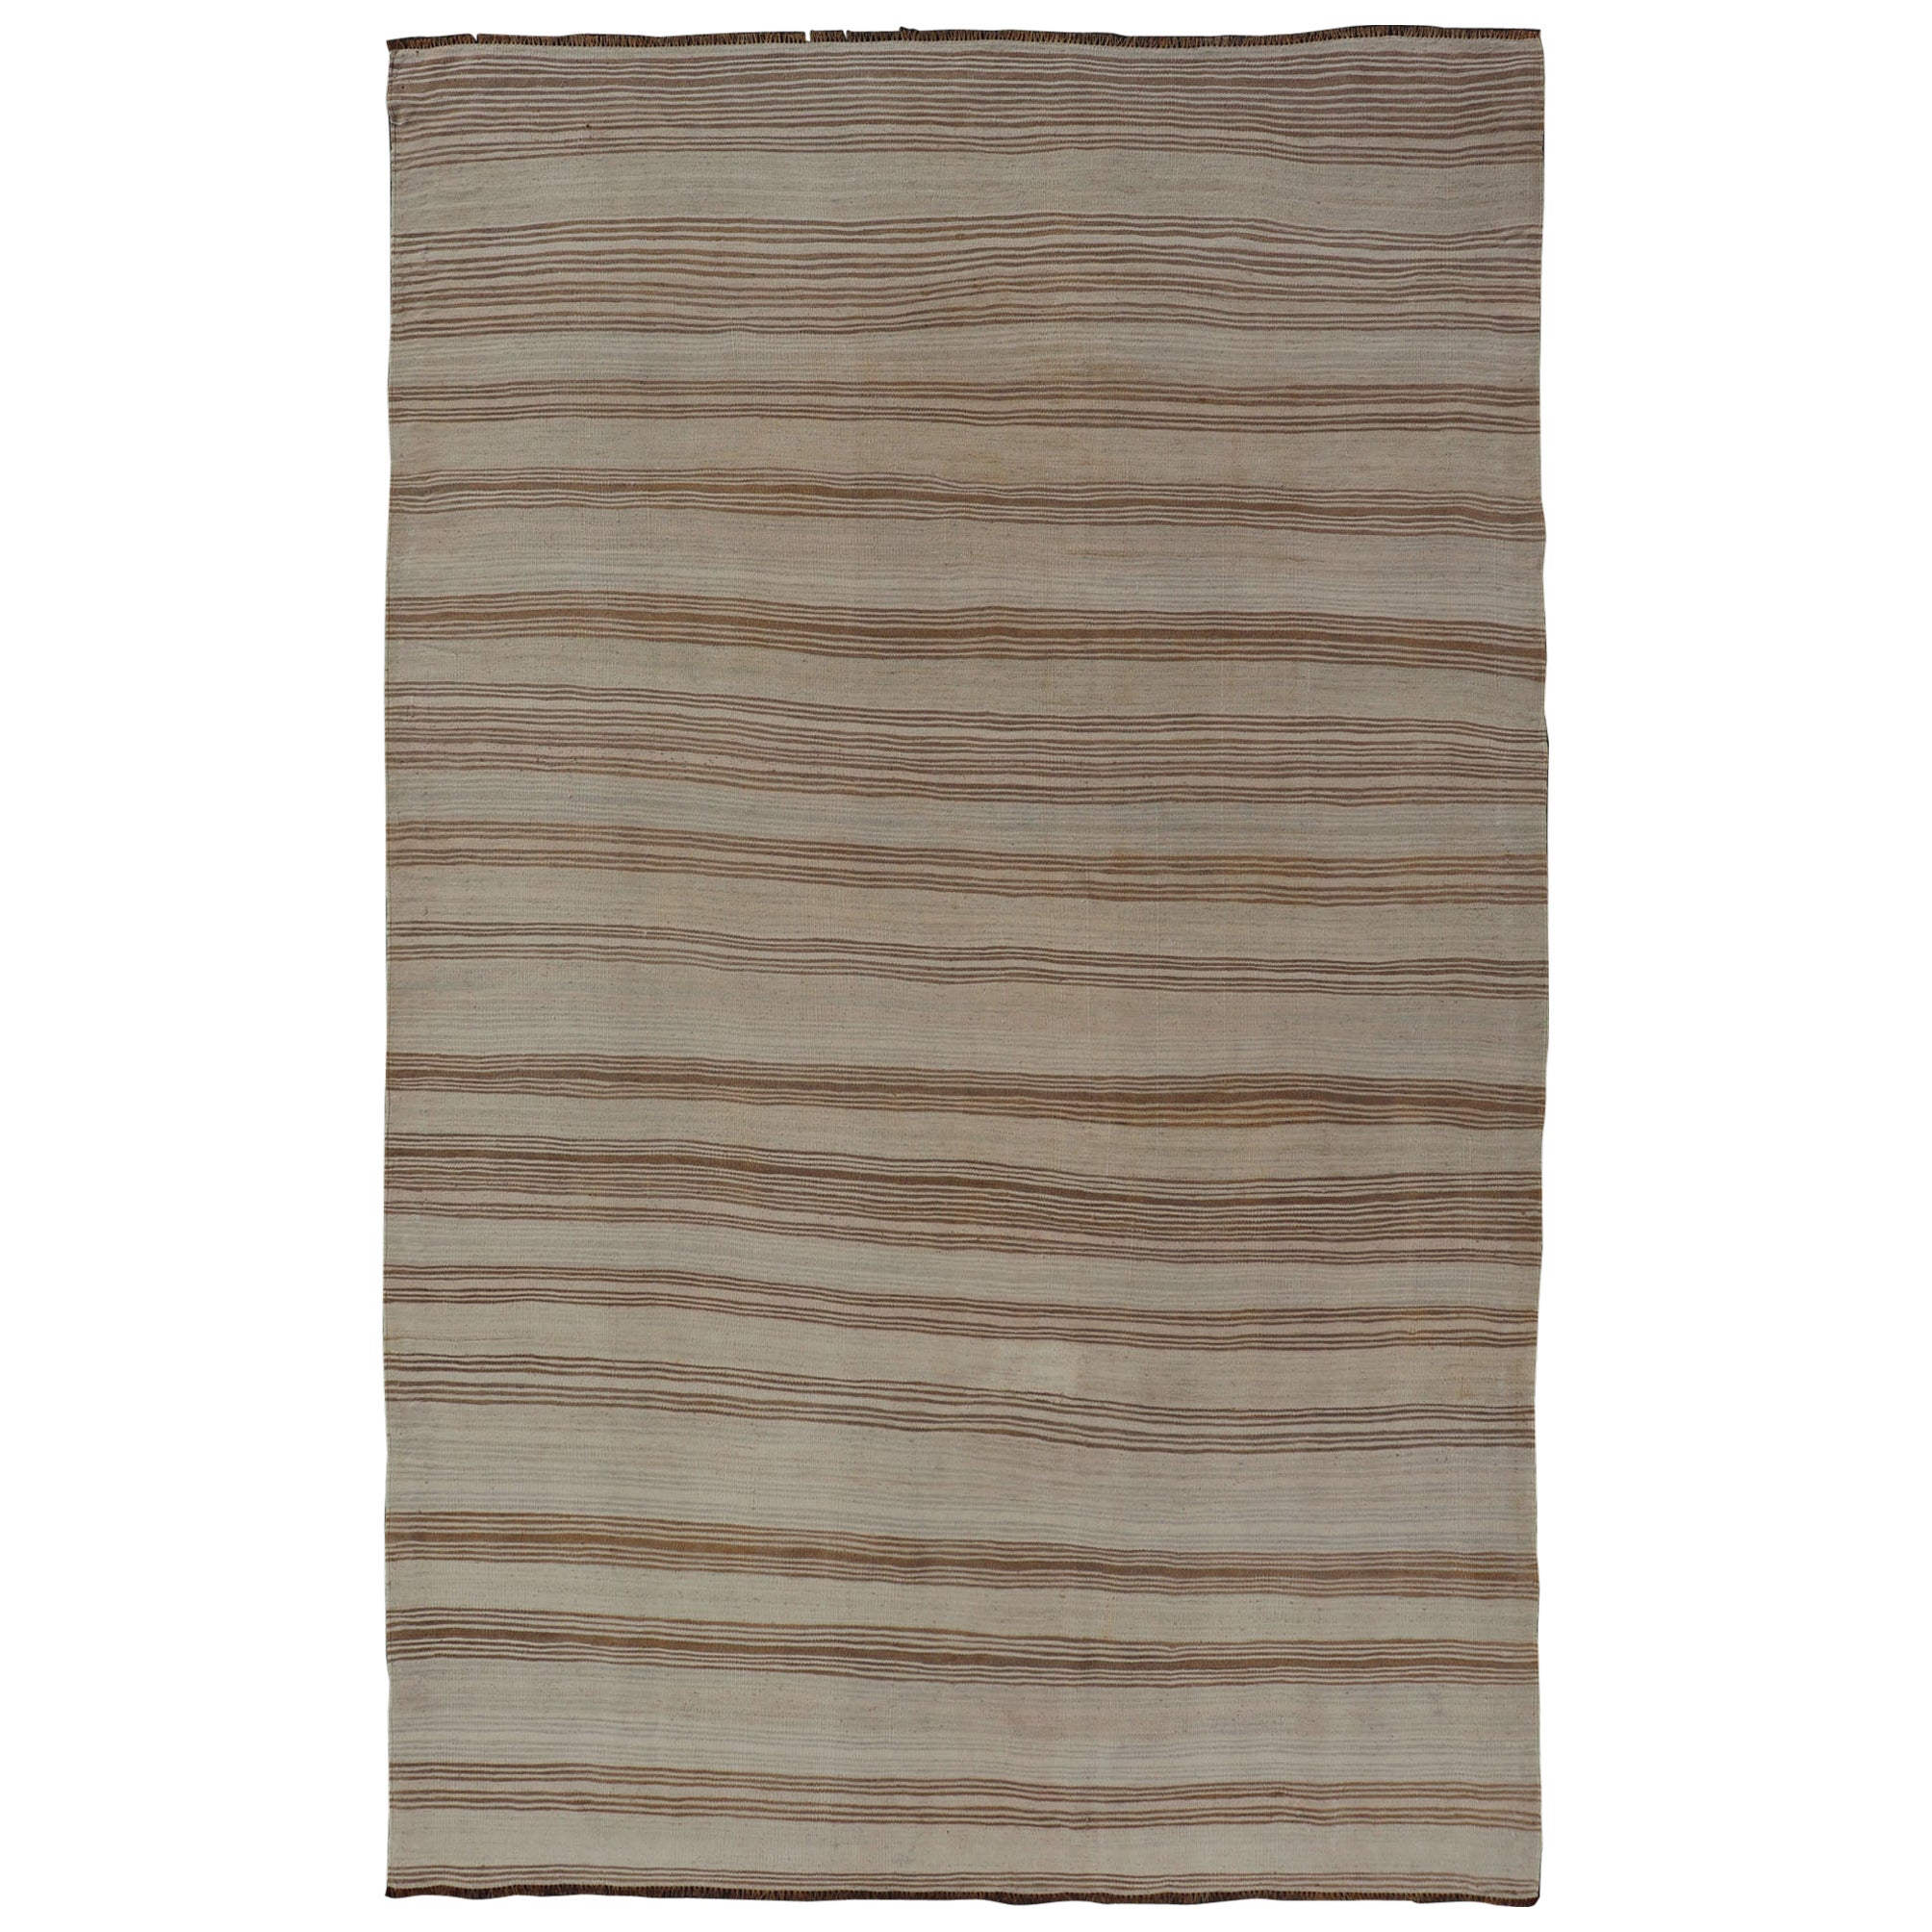 Vintage Turkish Kilim with Horizontal Stripes in Tan, Brown and Grey For Sale